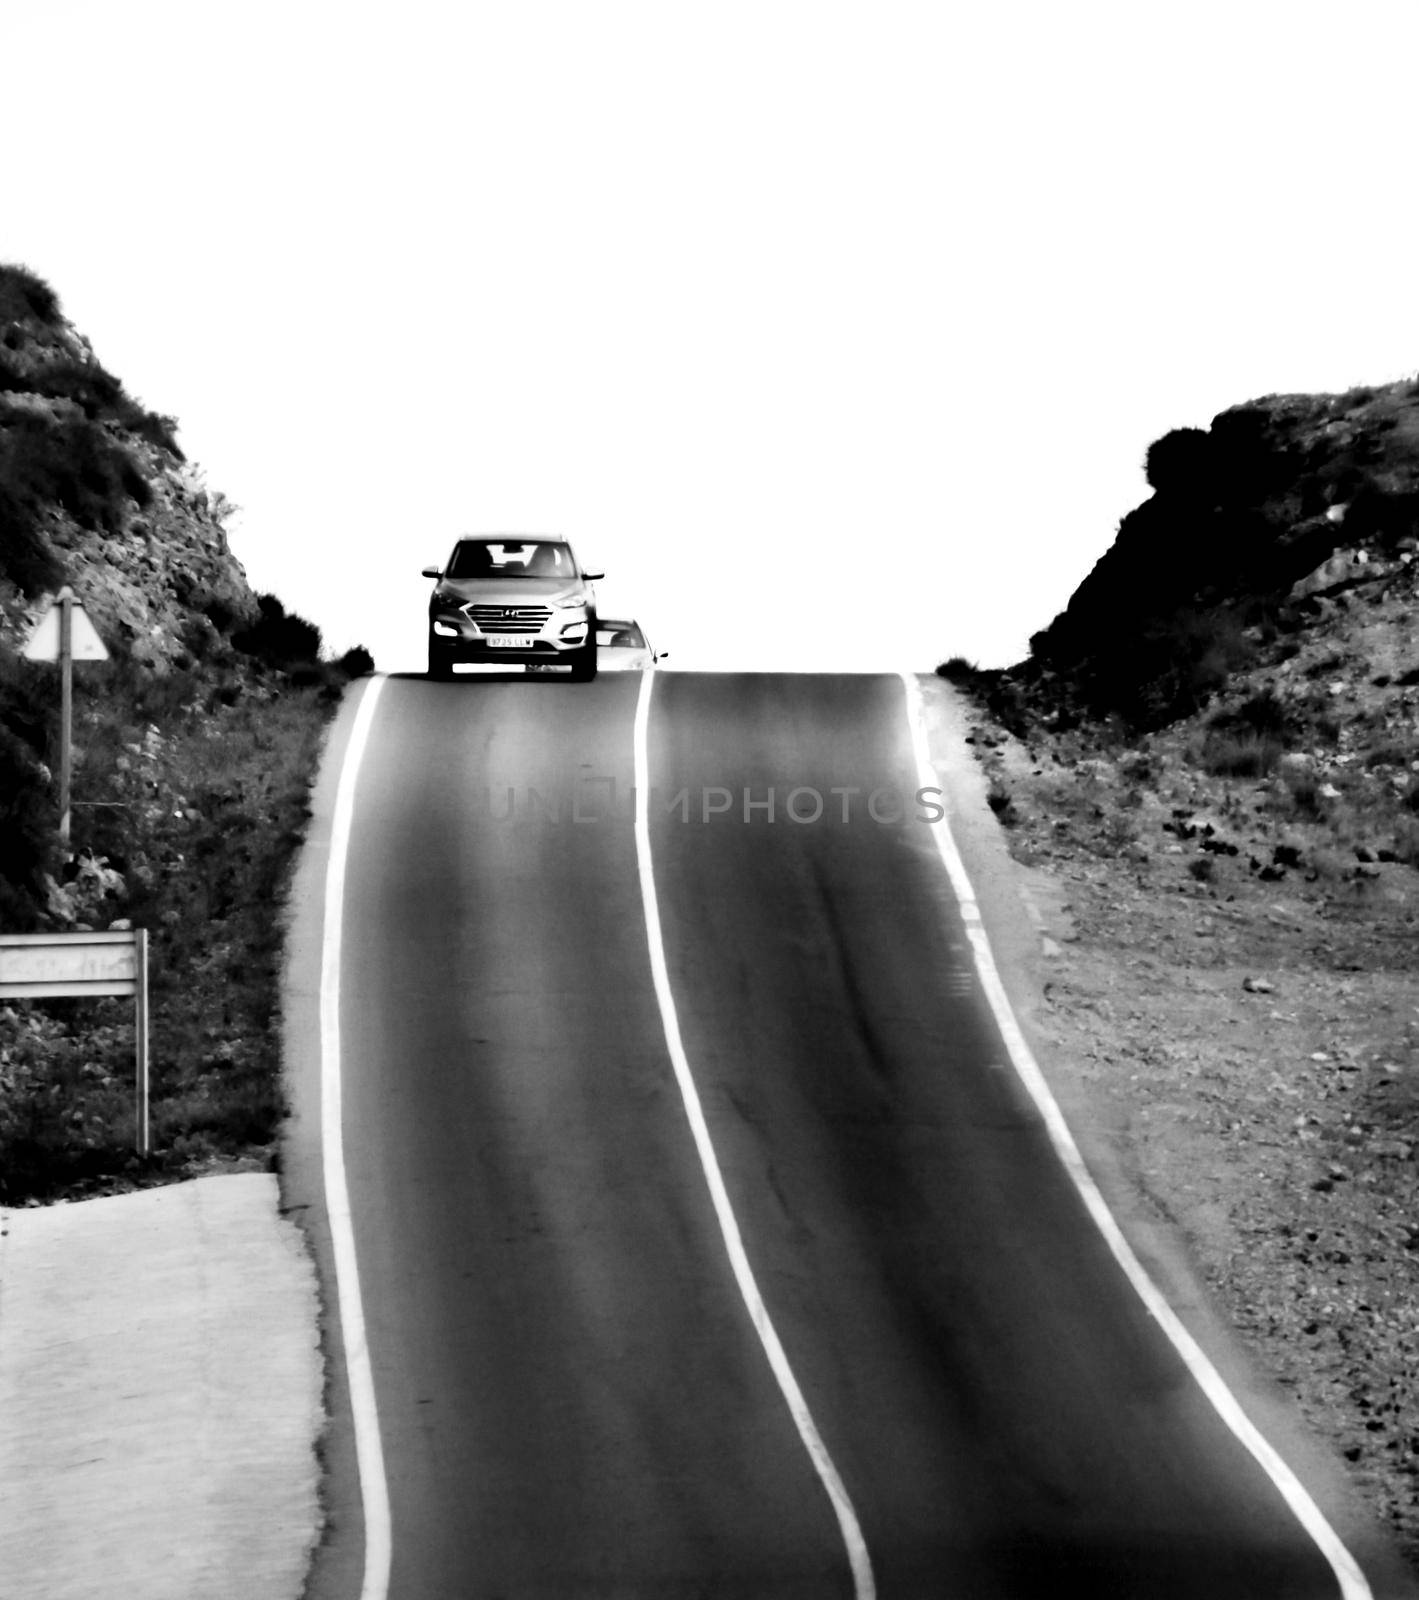 Dizzying road with traffic sign in Spain. Monochrome picture